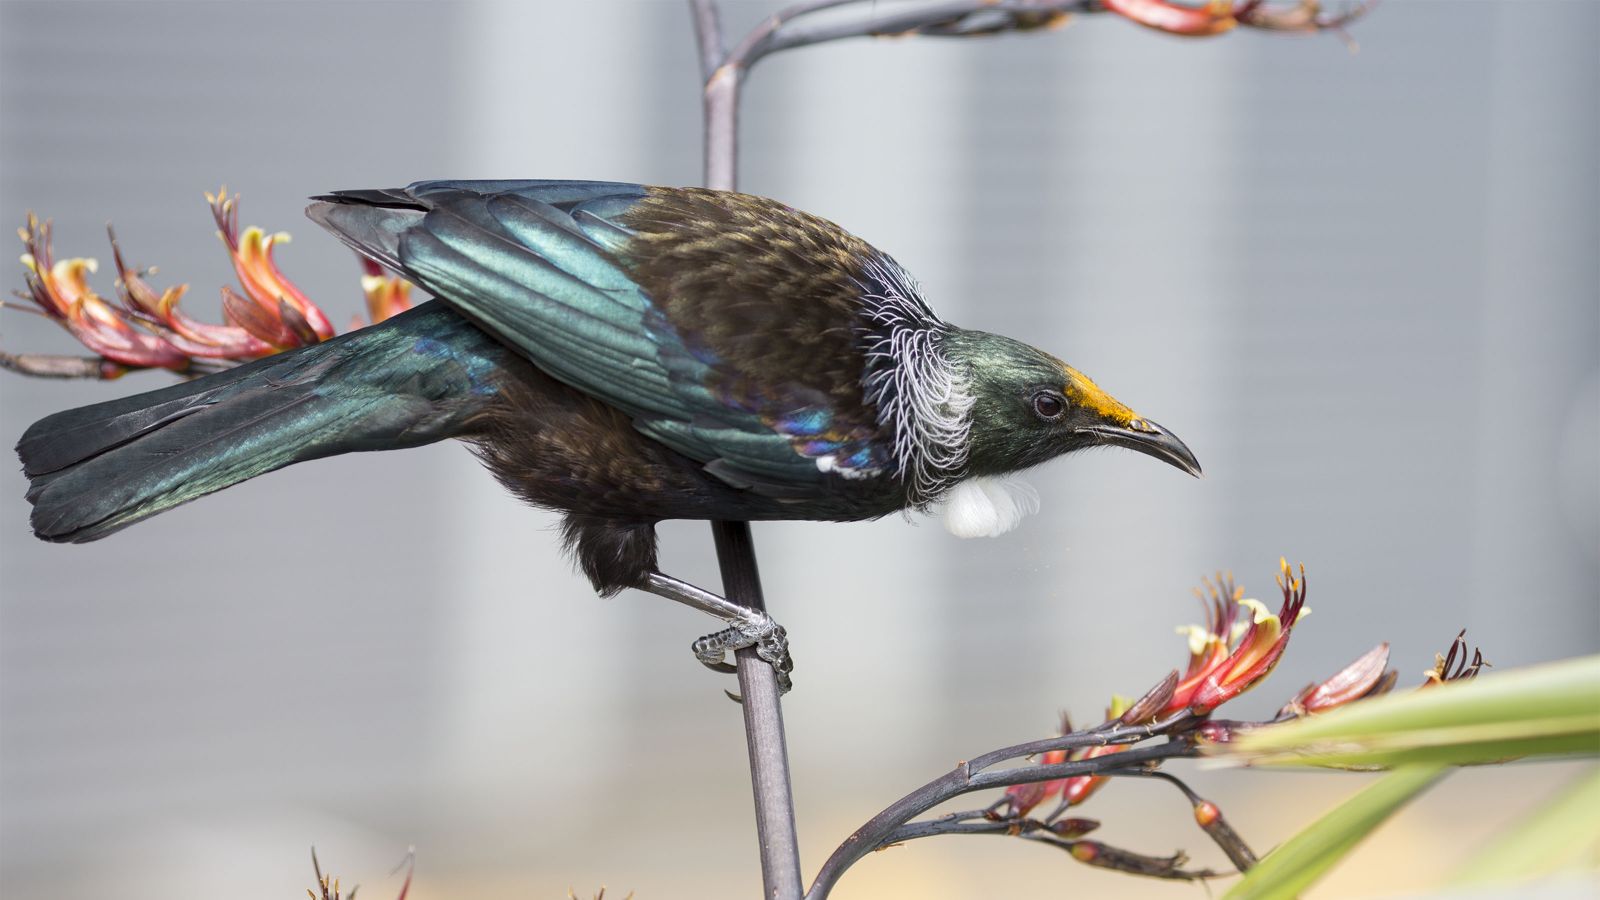 A close-up of a tui bird perched on a plant.